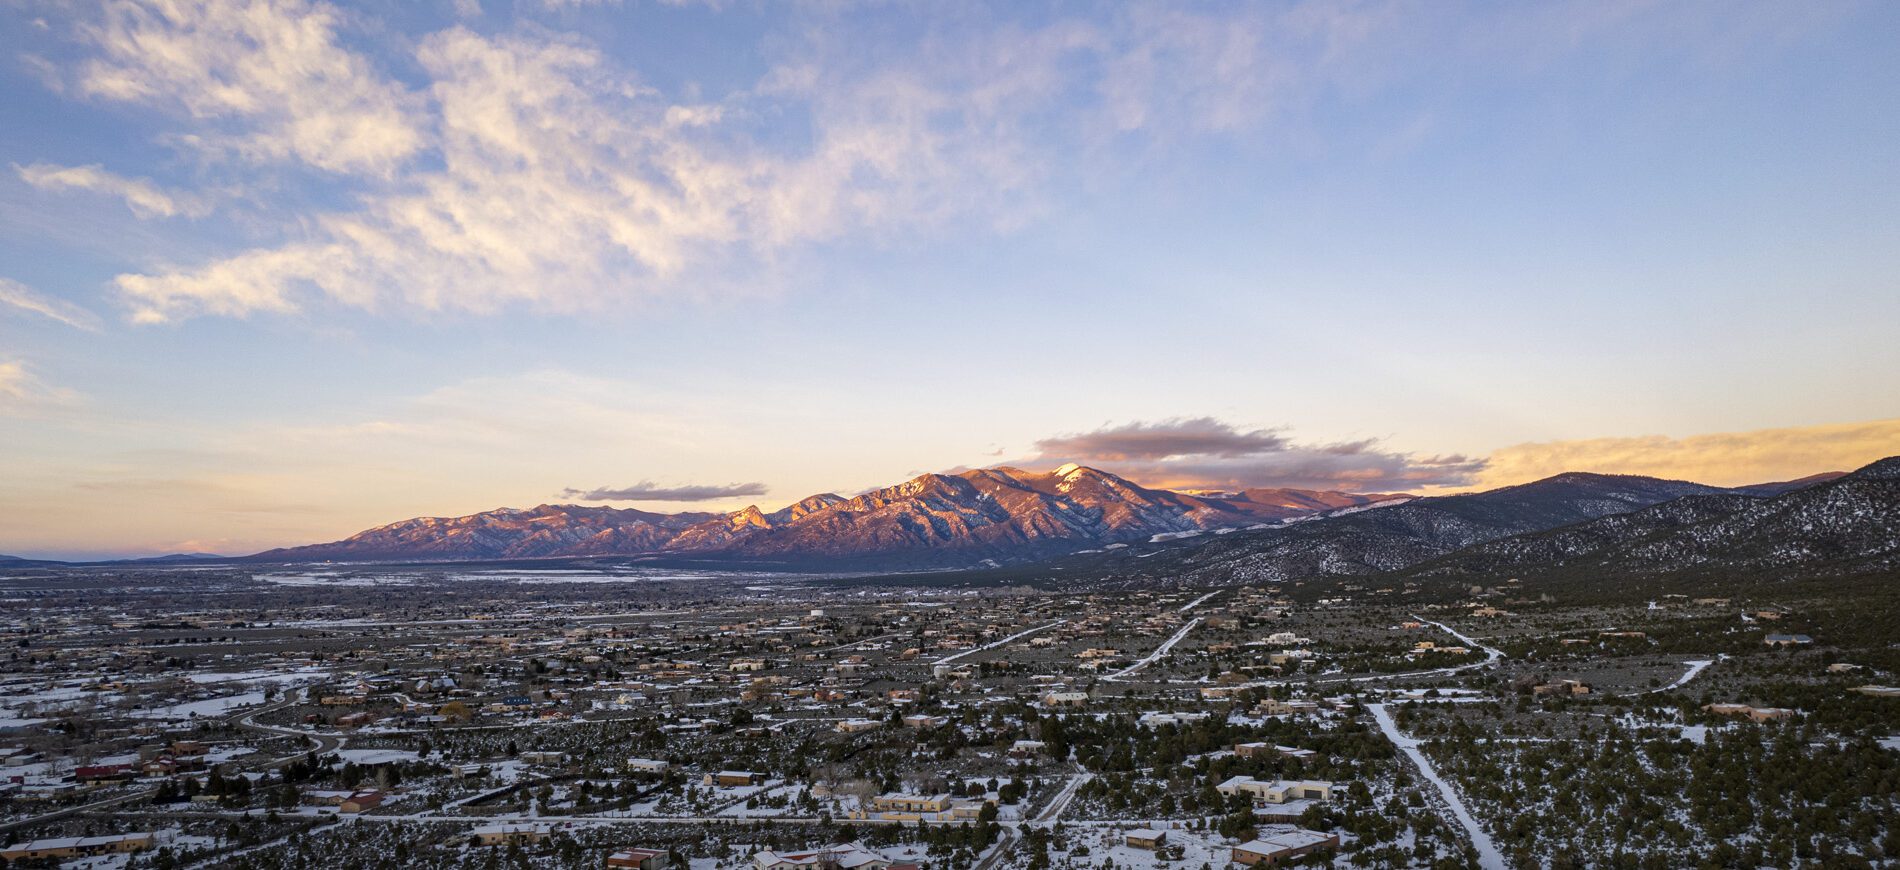 A view of the Taos valley and mountain in winter.